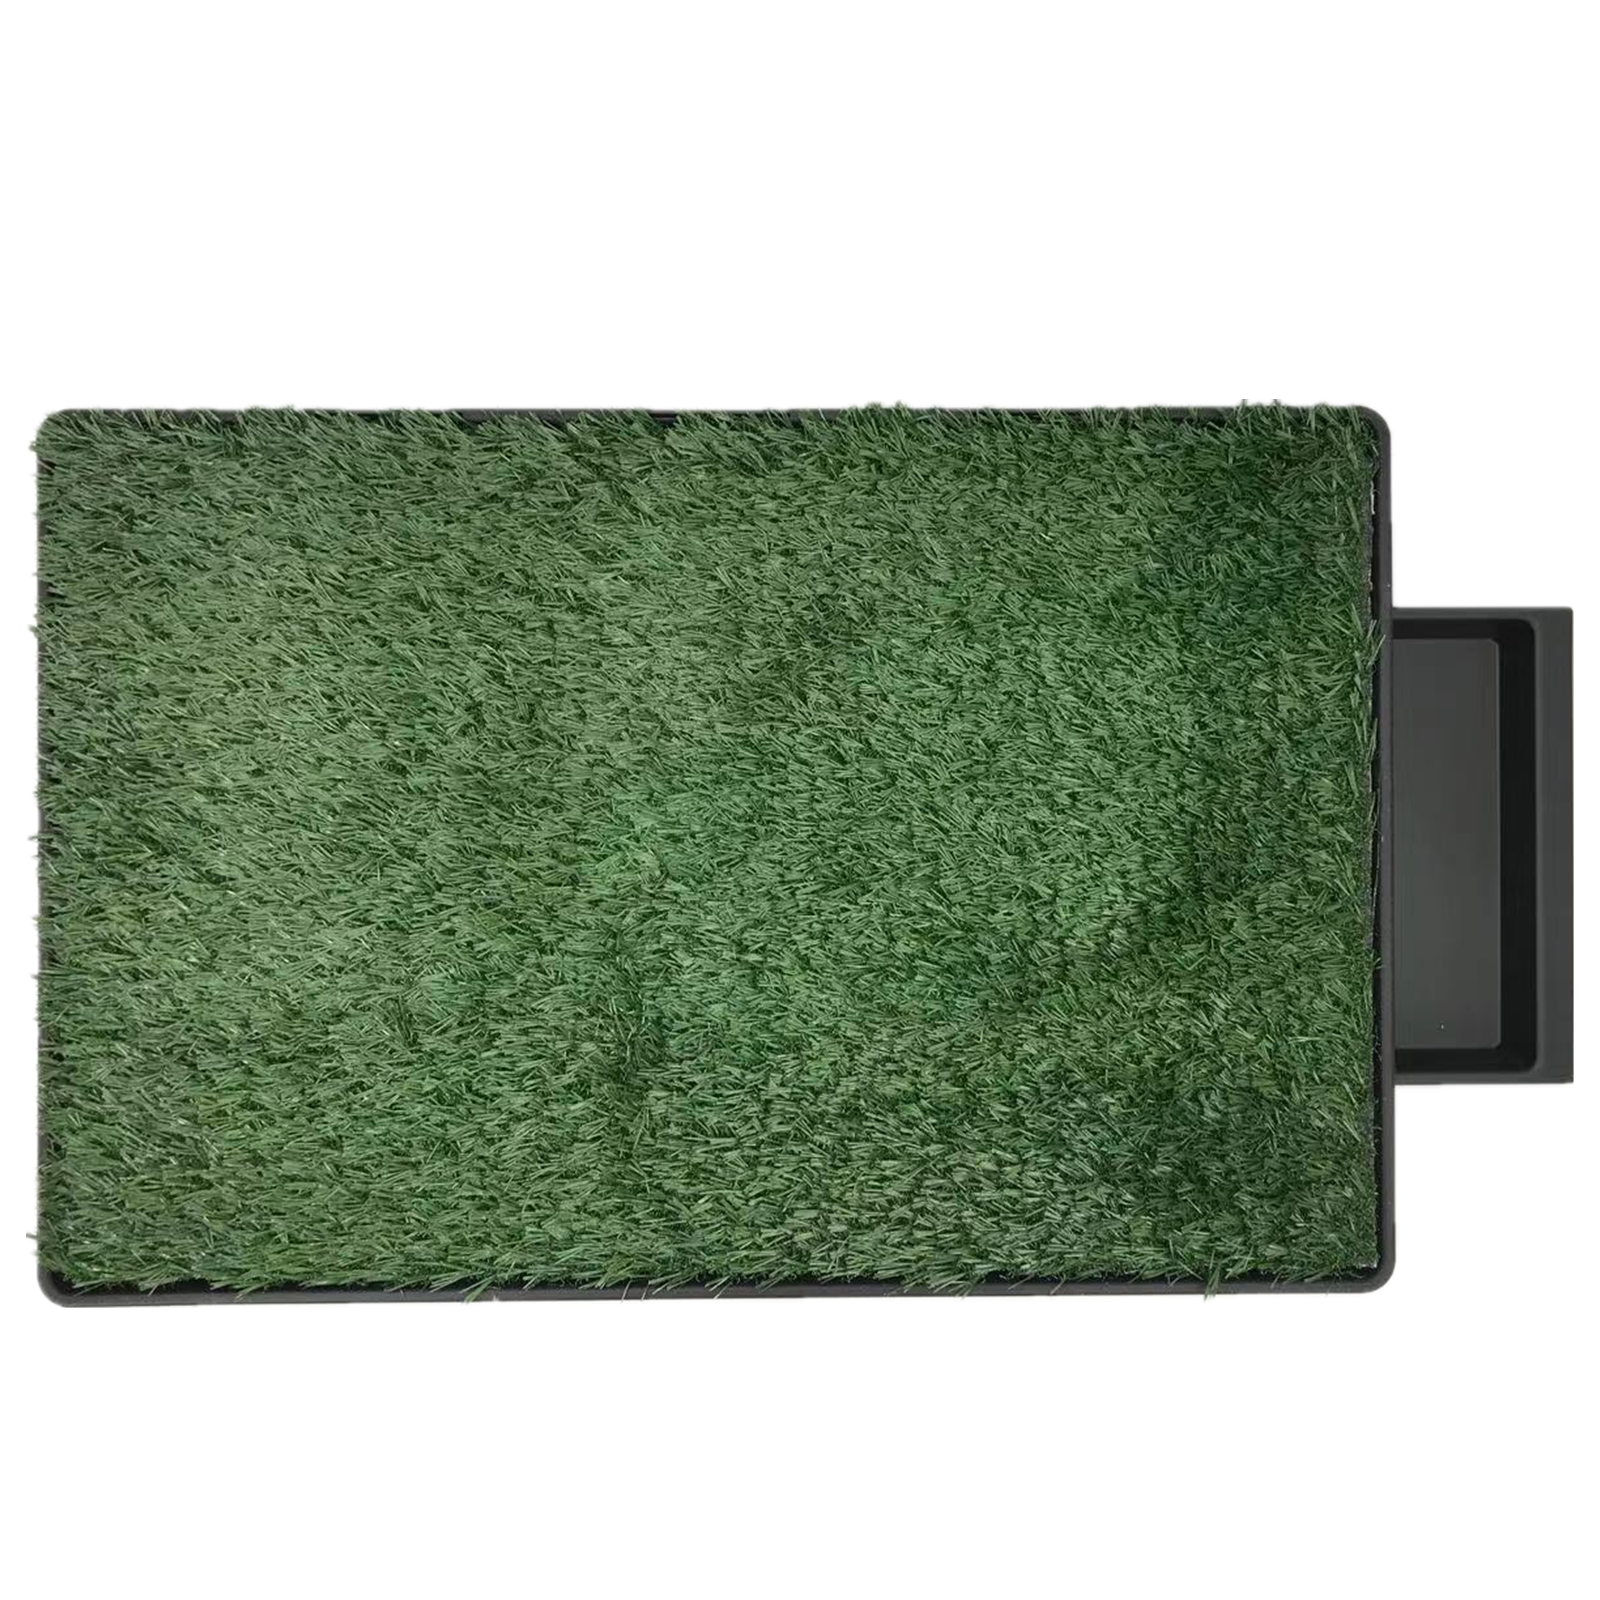 XL Indoor Dog Puppy Toilet Grass Potty Training Mat Loo Pad pad with 2 grass Deals499